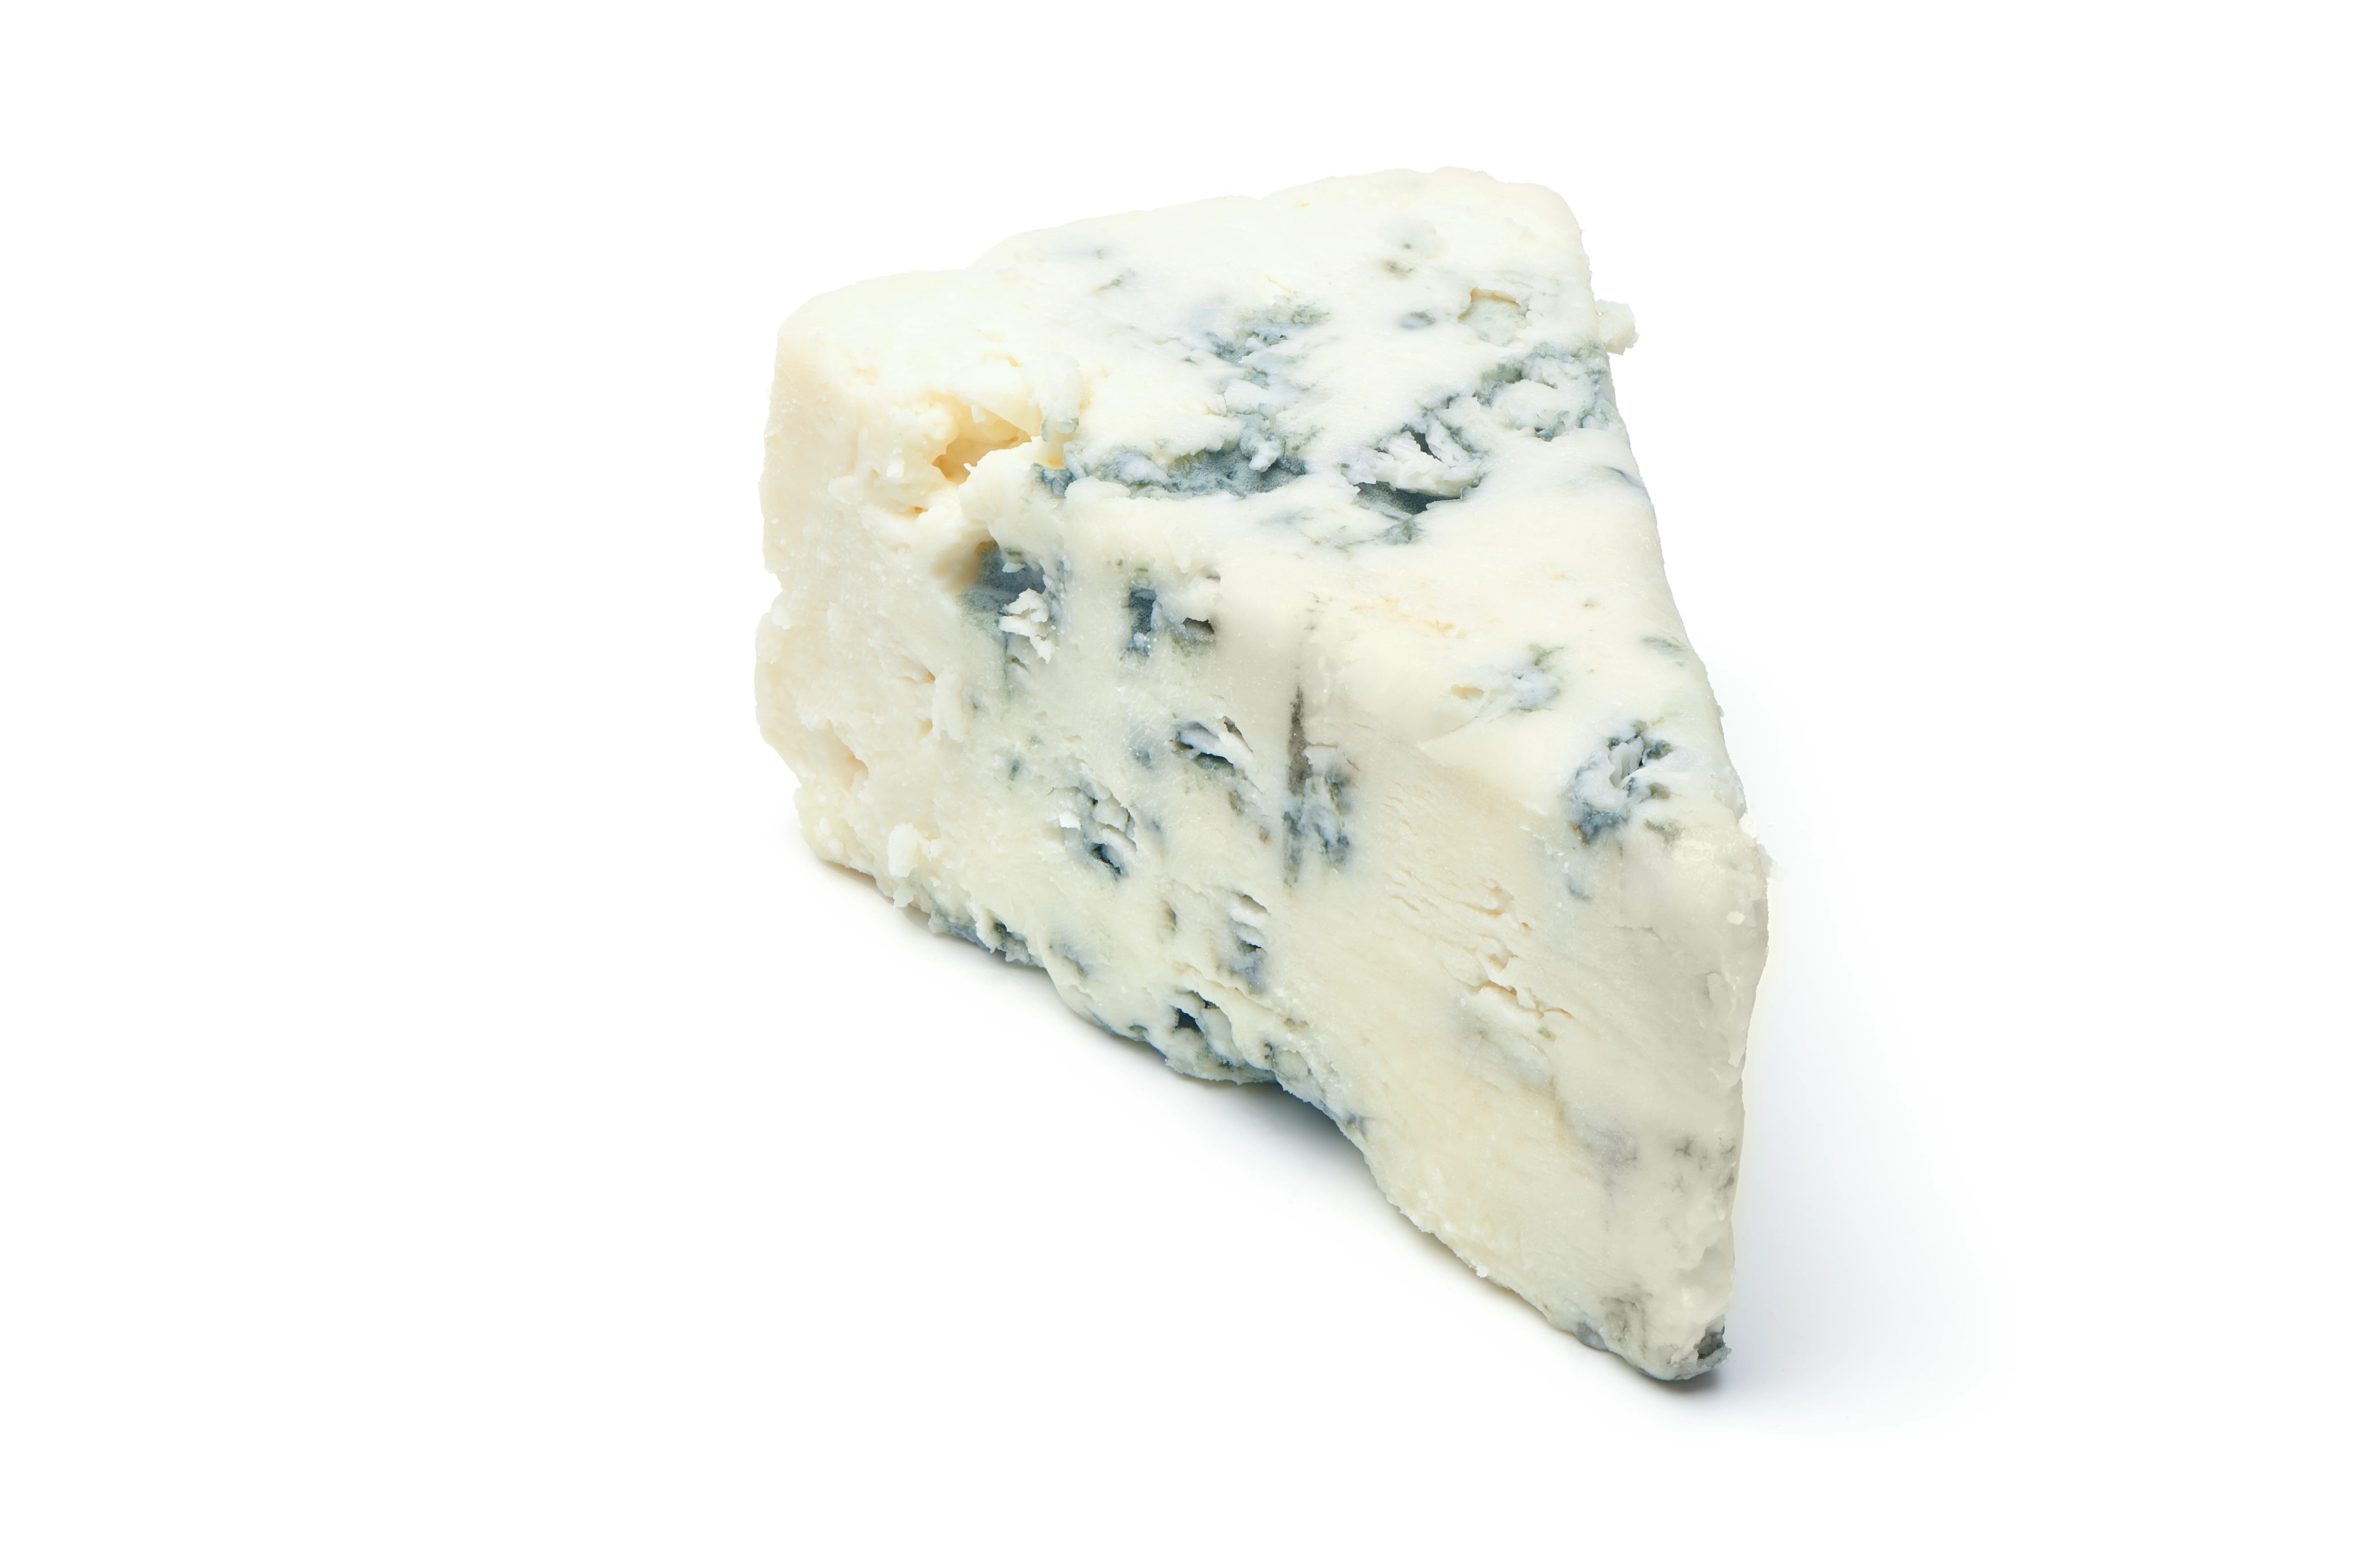 What Does Blue Cheese Taste Like